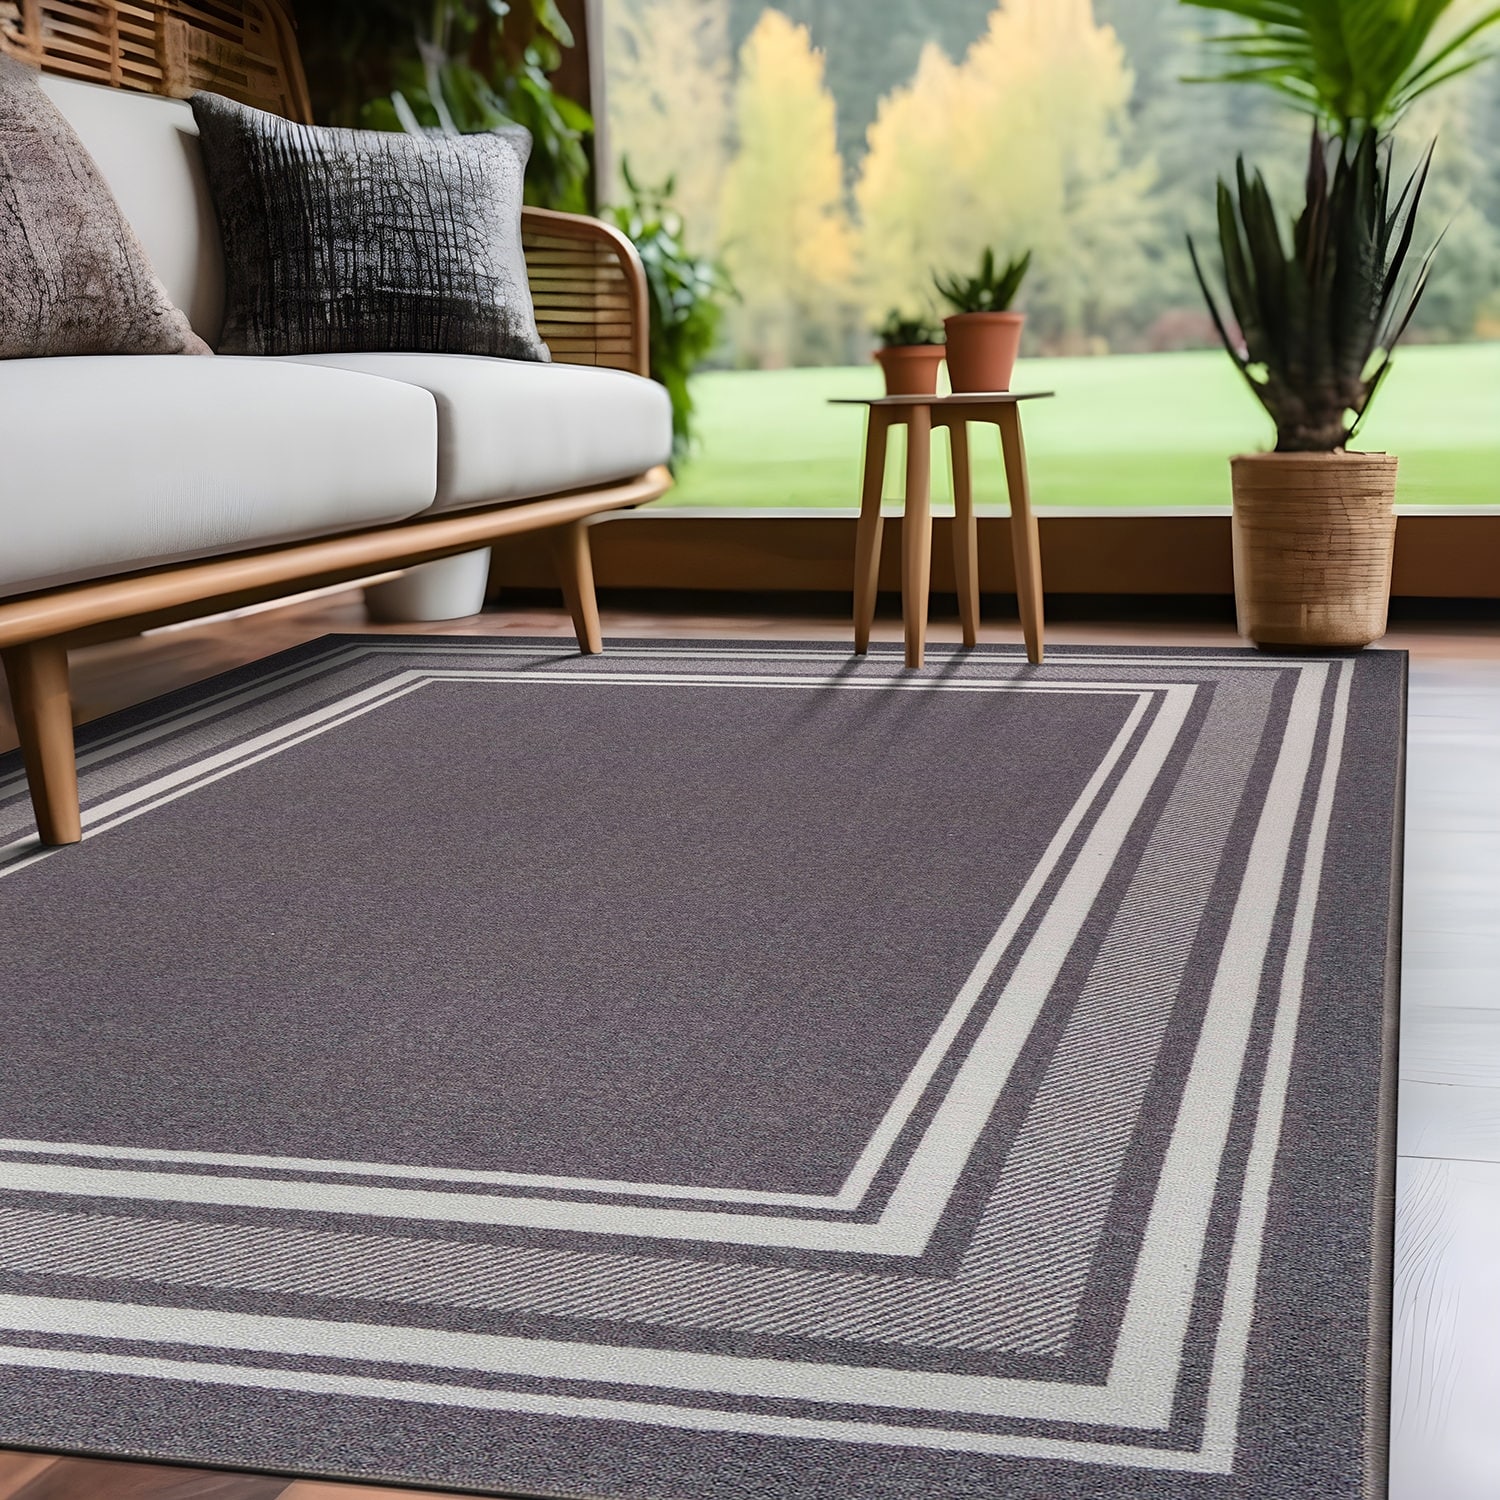 https://ak1.ostkcdn.com/images/products/is/images/direct/e892d38adbe9d4dc15da3b1643603761f5e82077/Beverly-Rug-Non-Slip-Indoor-Rugs-for-Living-Room-Bordered-Area-Rug-Blue-8X10.jpg